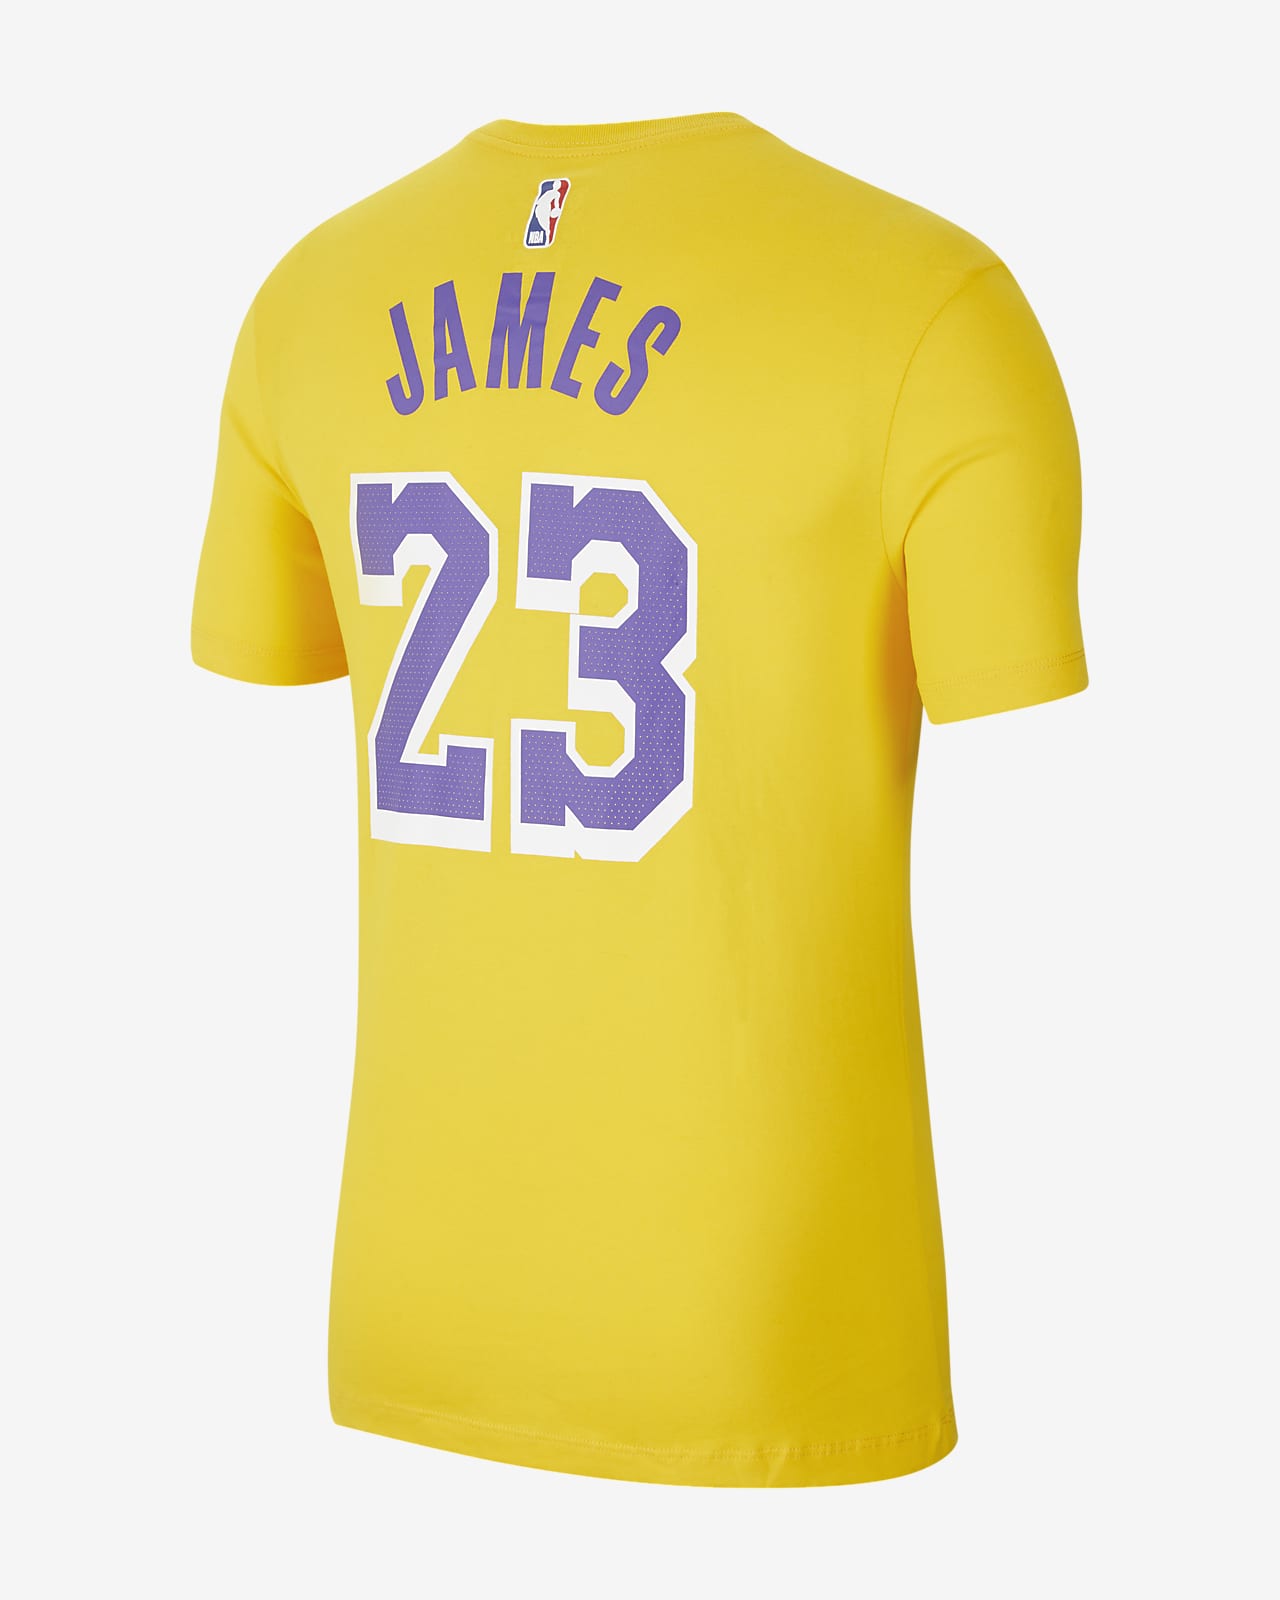 Los Angeles Lakers James #23 T shirt Gioventù Uomo Name Number Magliette Sportive da Basket Moda Tee Tops